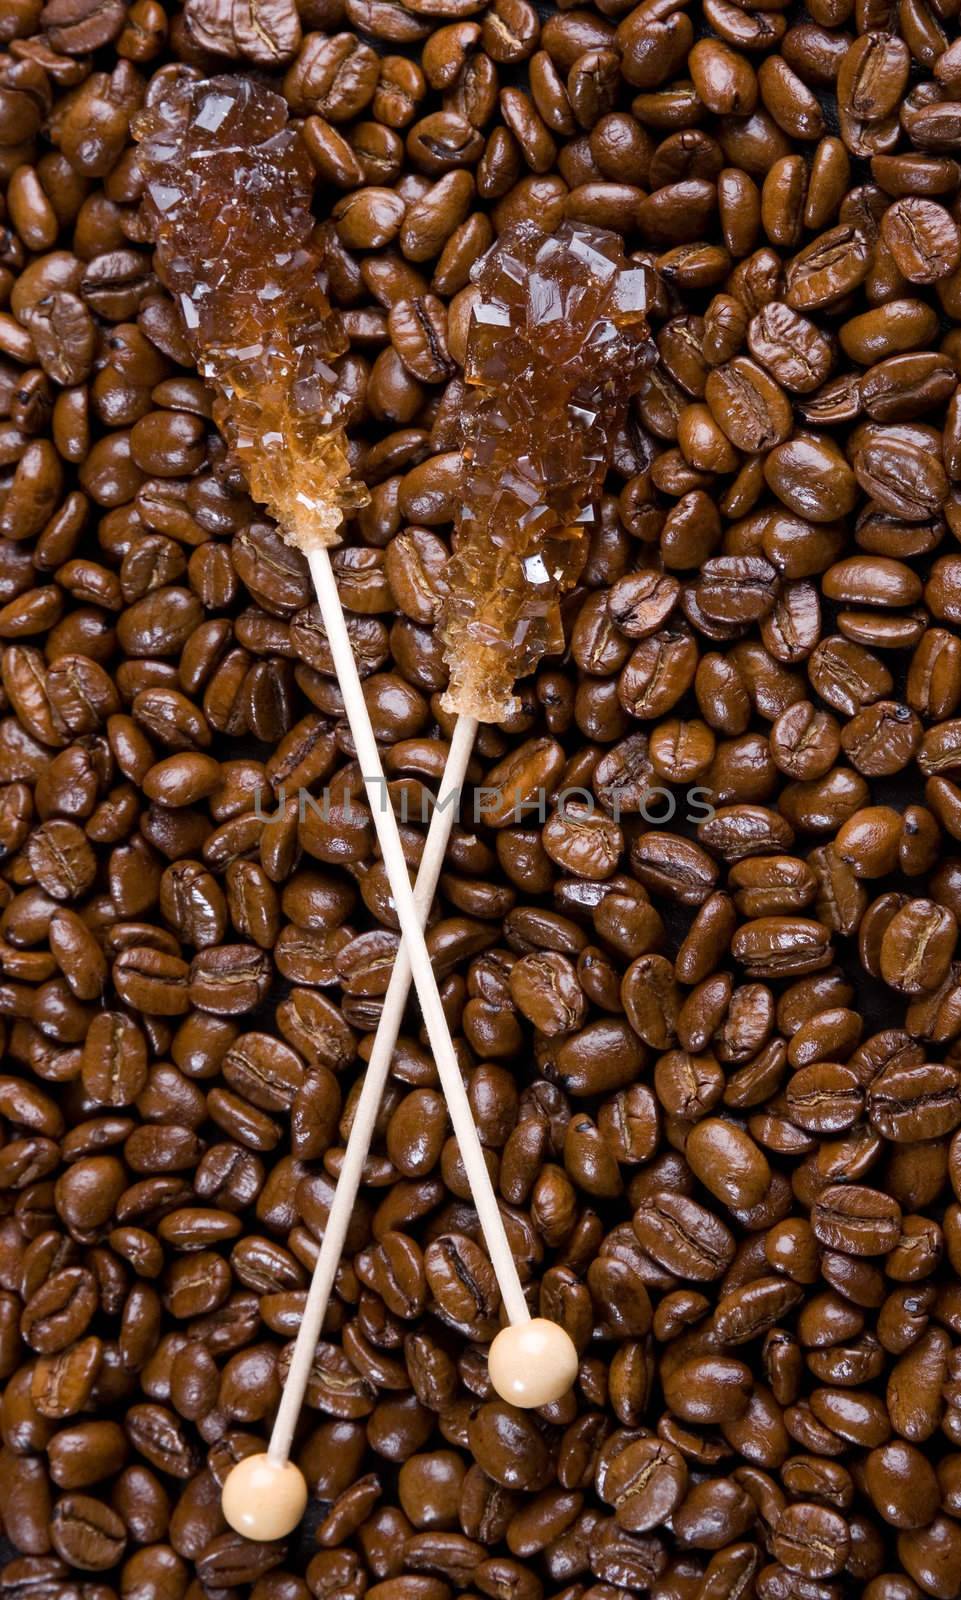 Close-up of offee beans closeup with brown sugar crystals